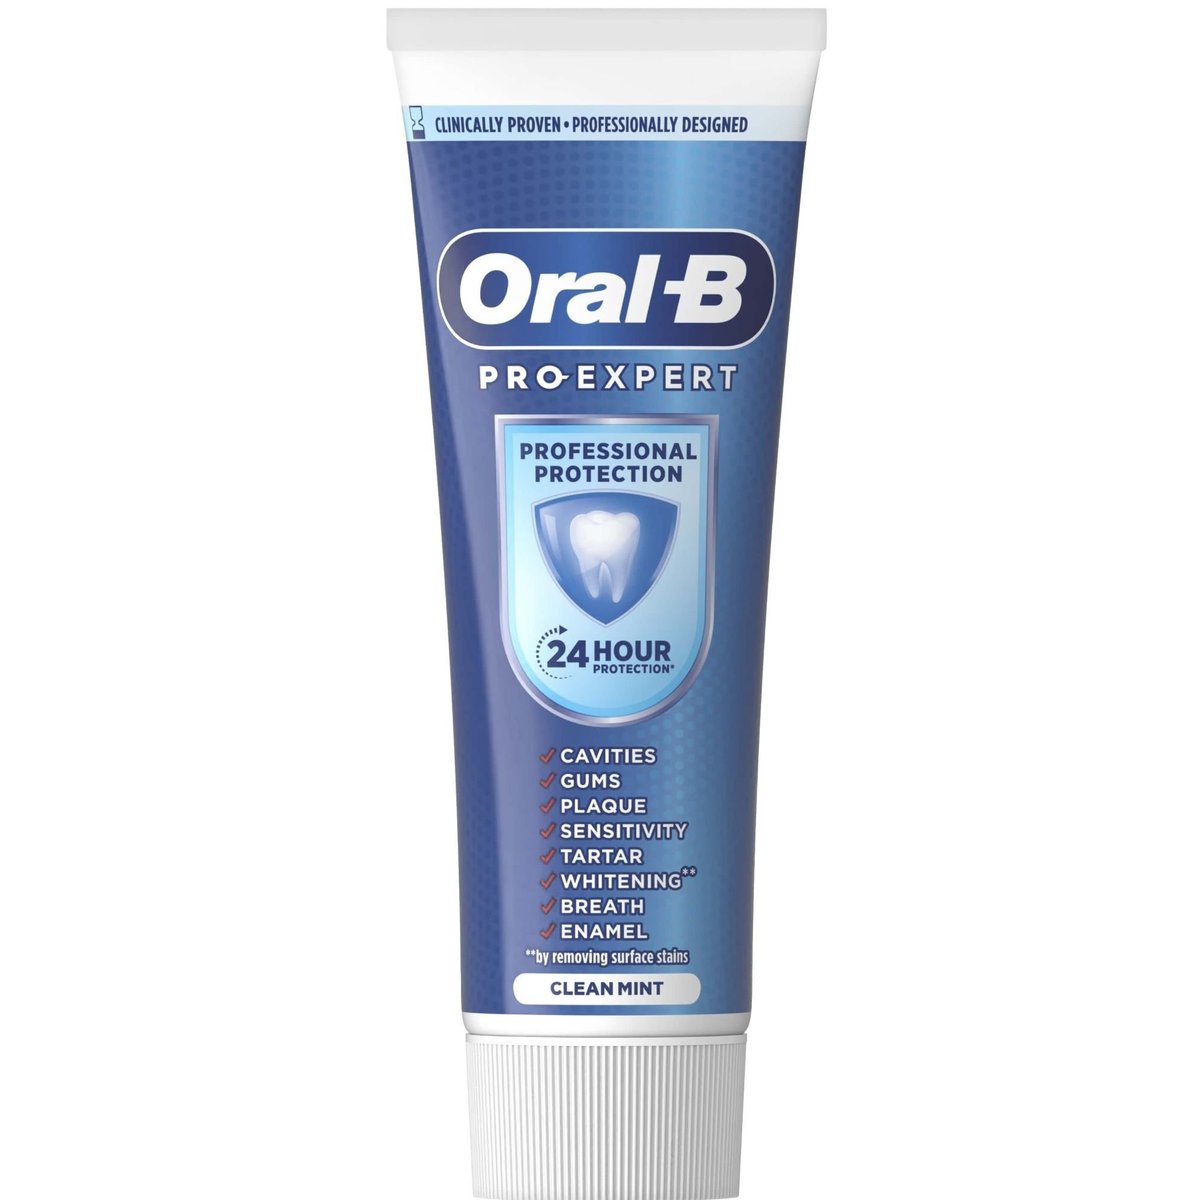 Oral-B Pro-Expert Professional Protection zubní pasta